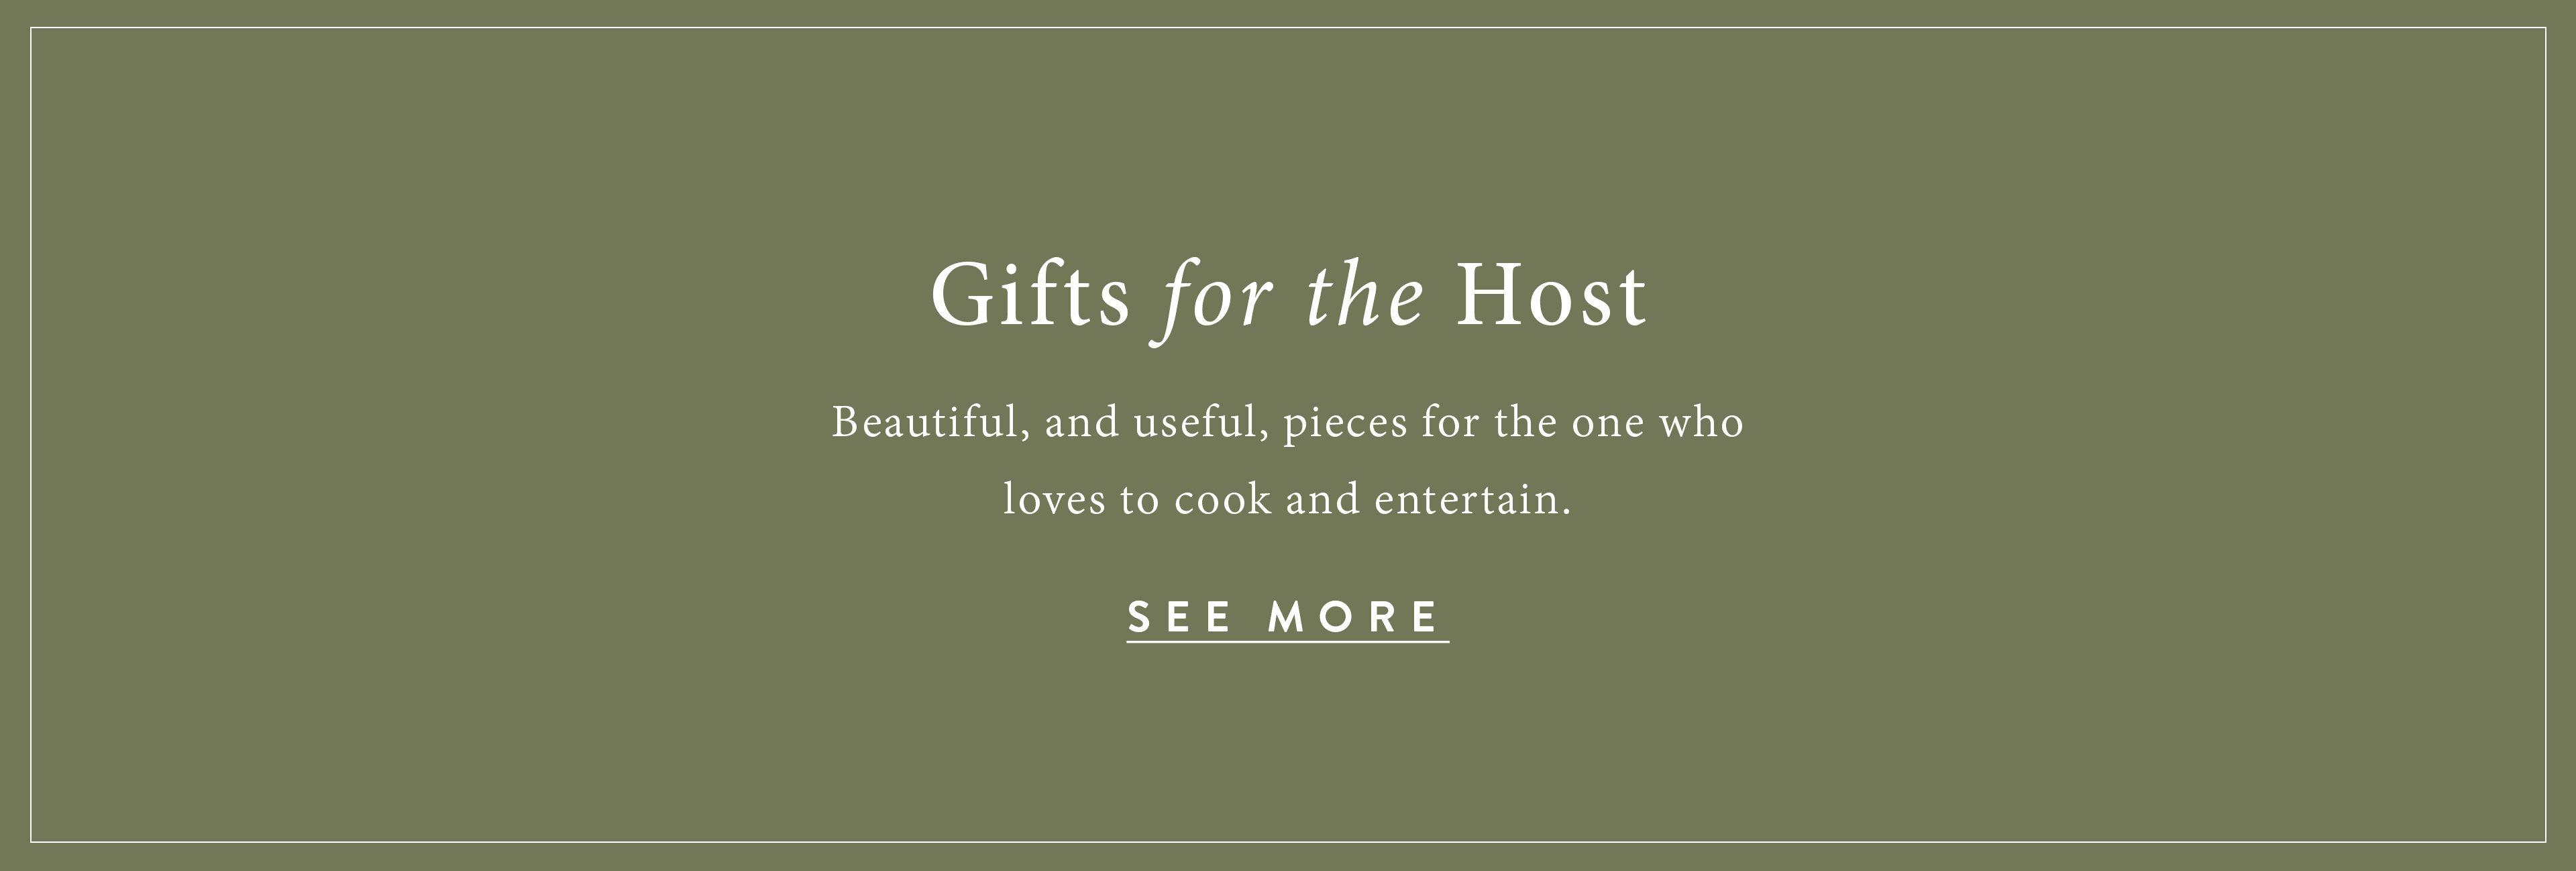 gifts for the host - beautiful, and useful, pieces for the one who loves to cook and entertain. see more. 